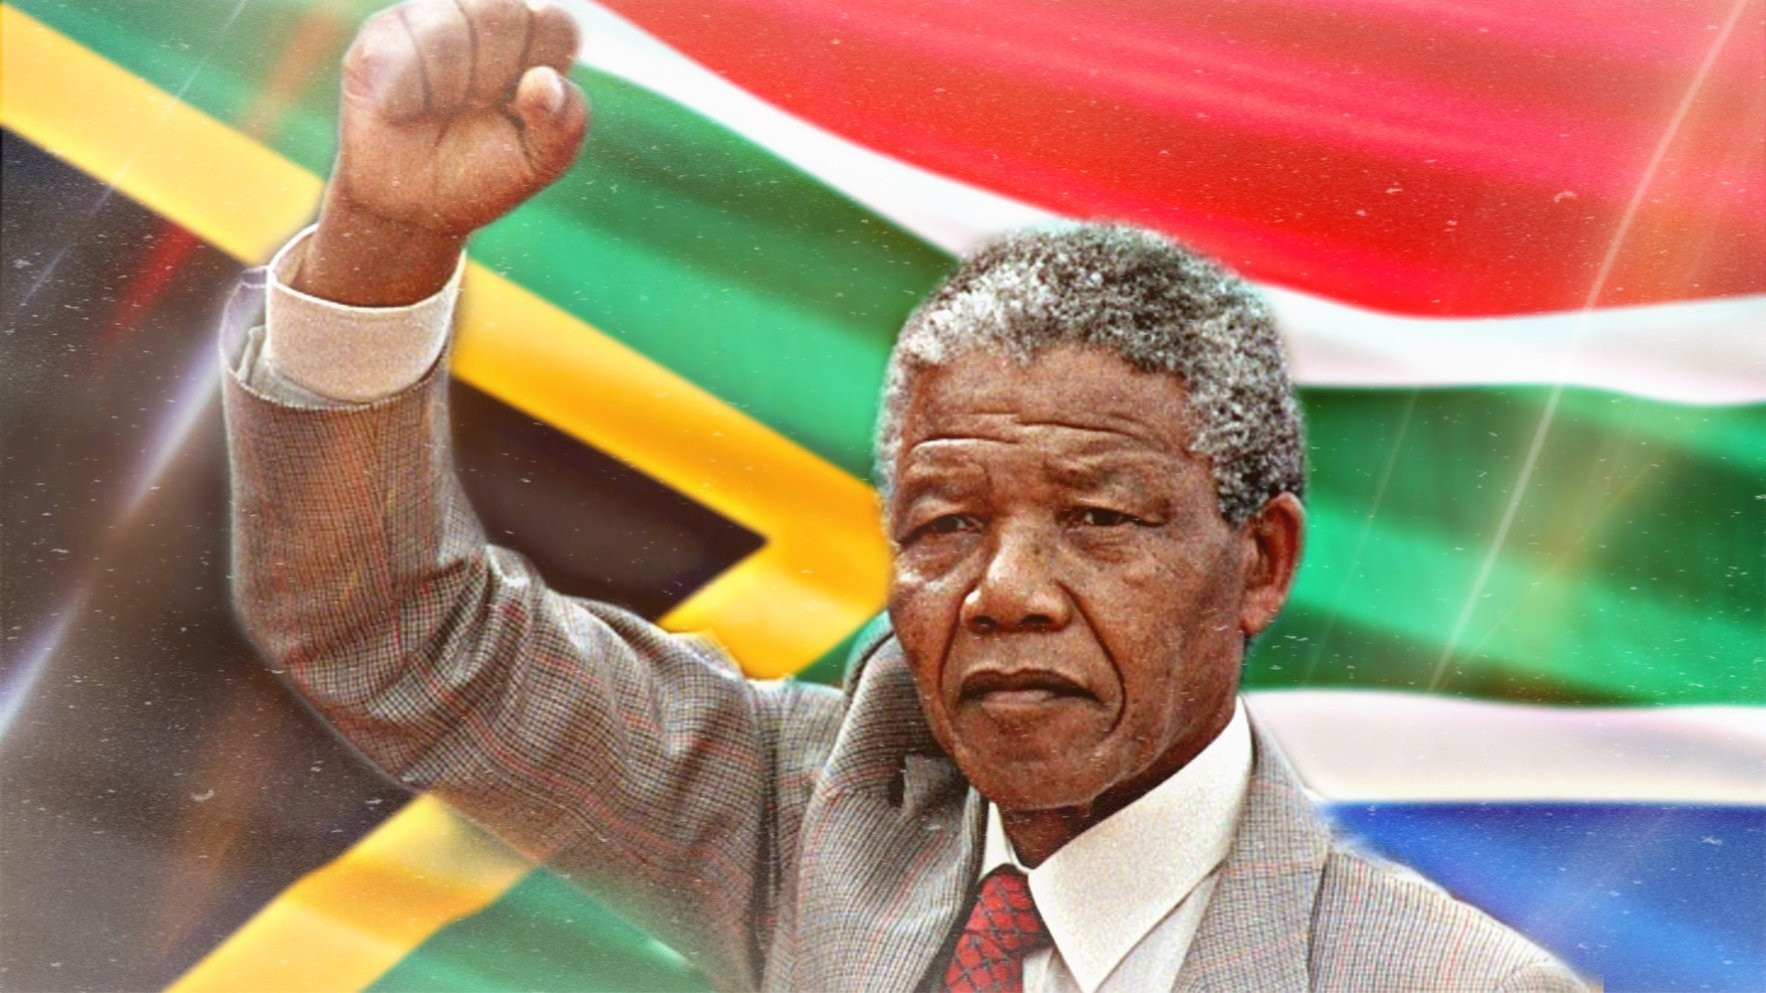 Nelson Mandela Day: When is Nelson Mandela day and why it is important? - BBC Newsround